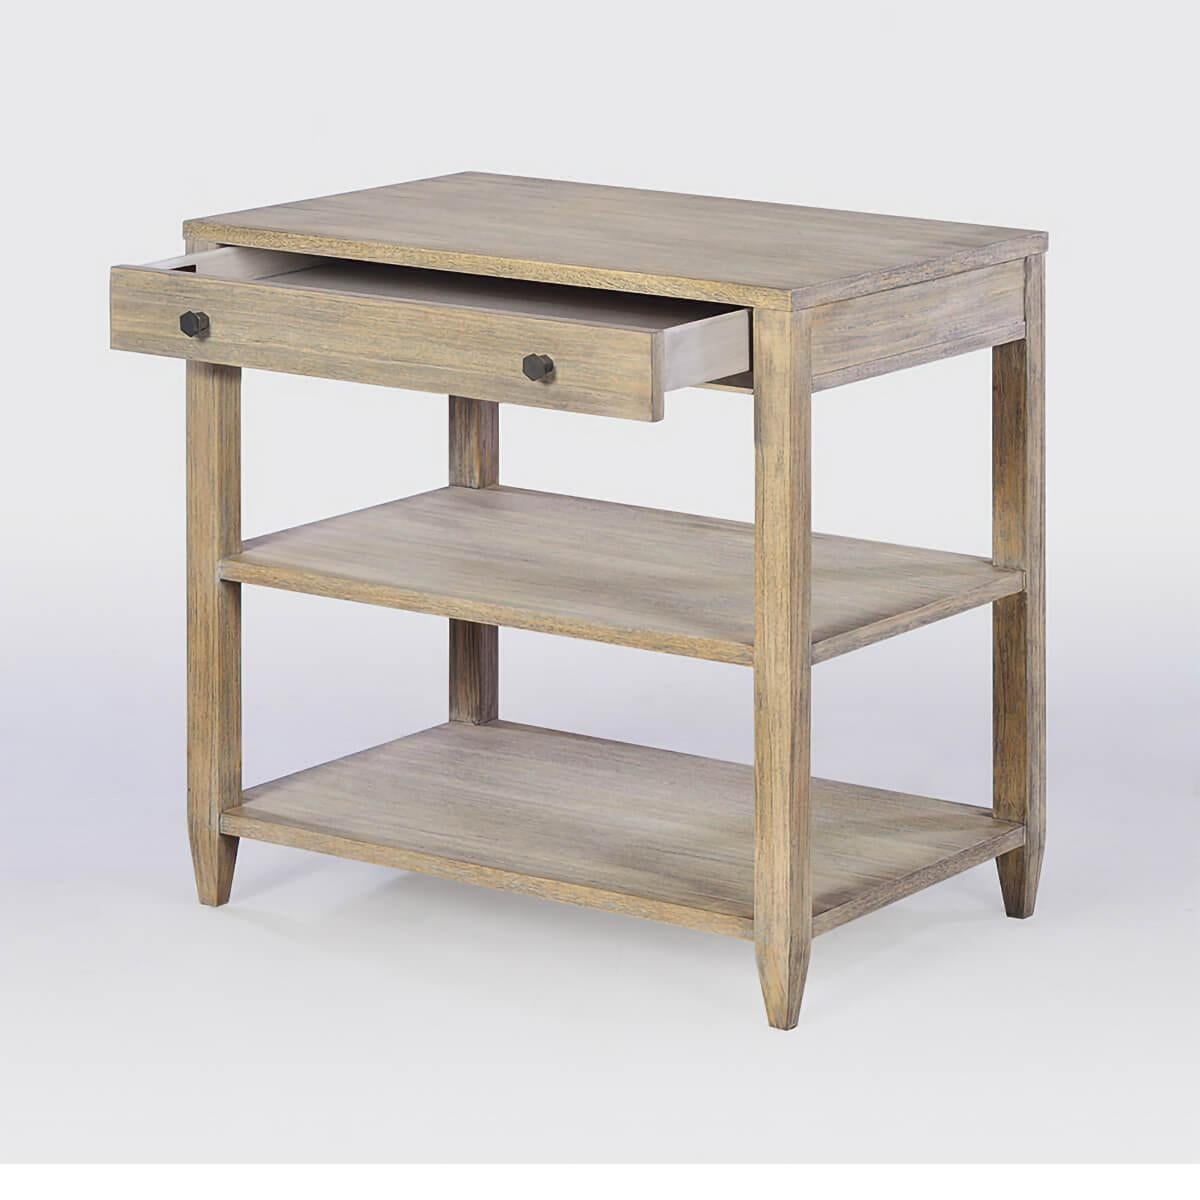 Classic wide rectangle side table with a drawer, two shelves, brass hardware, and tapered feet, has a “rabbit” finish showing slight grain accents in celtis veneer and solids. 

Dimensions: 26